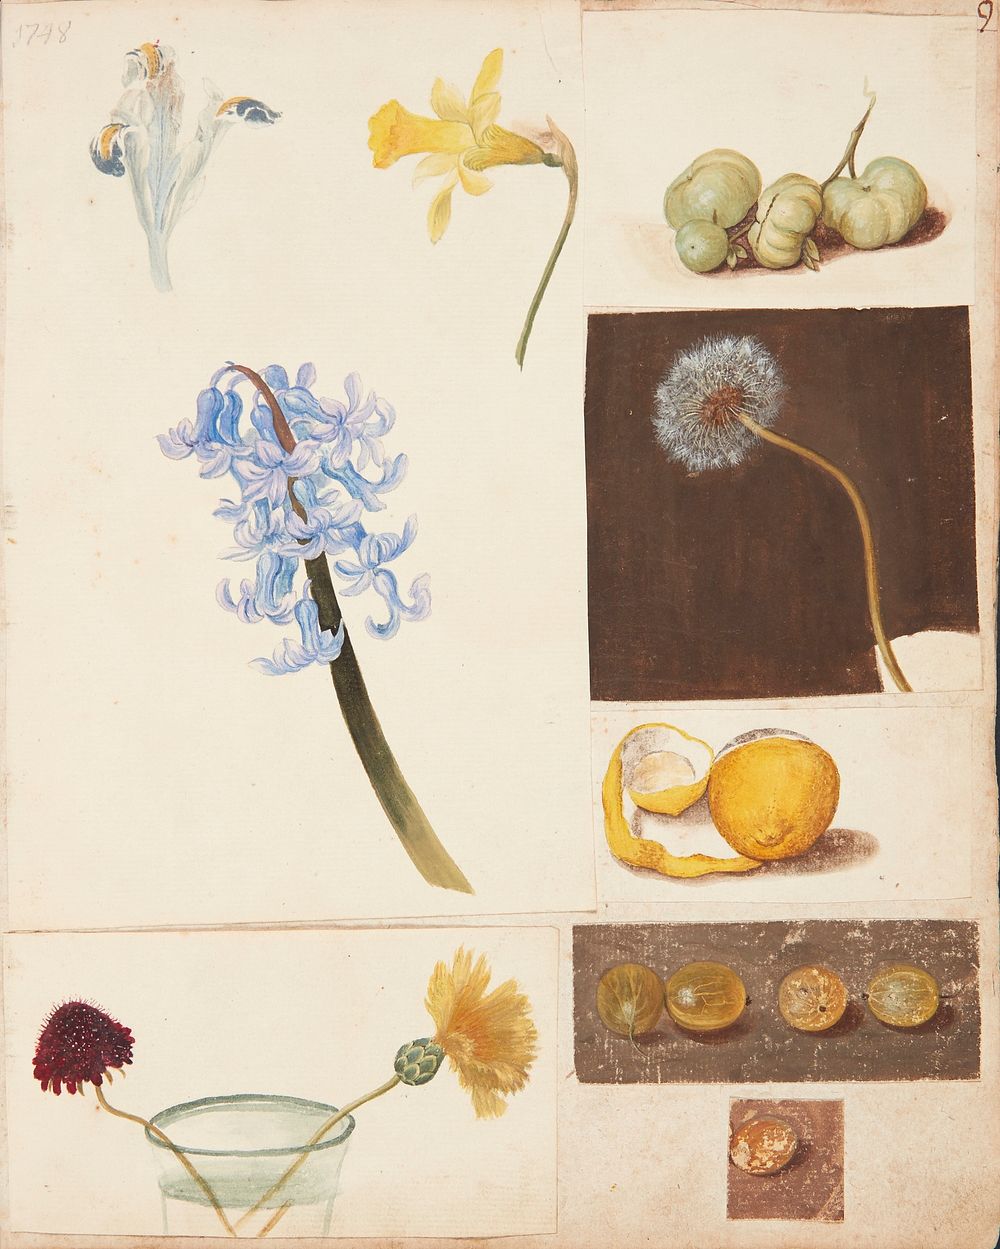 Study of flowers, fruits and green tomatoes by Johanna Fosie